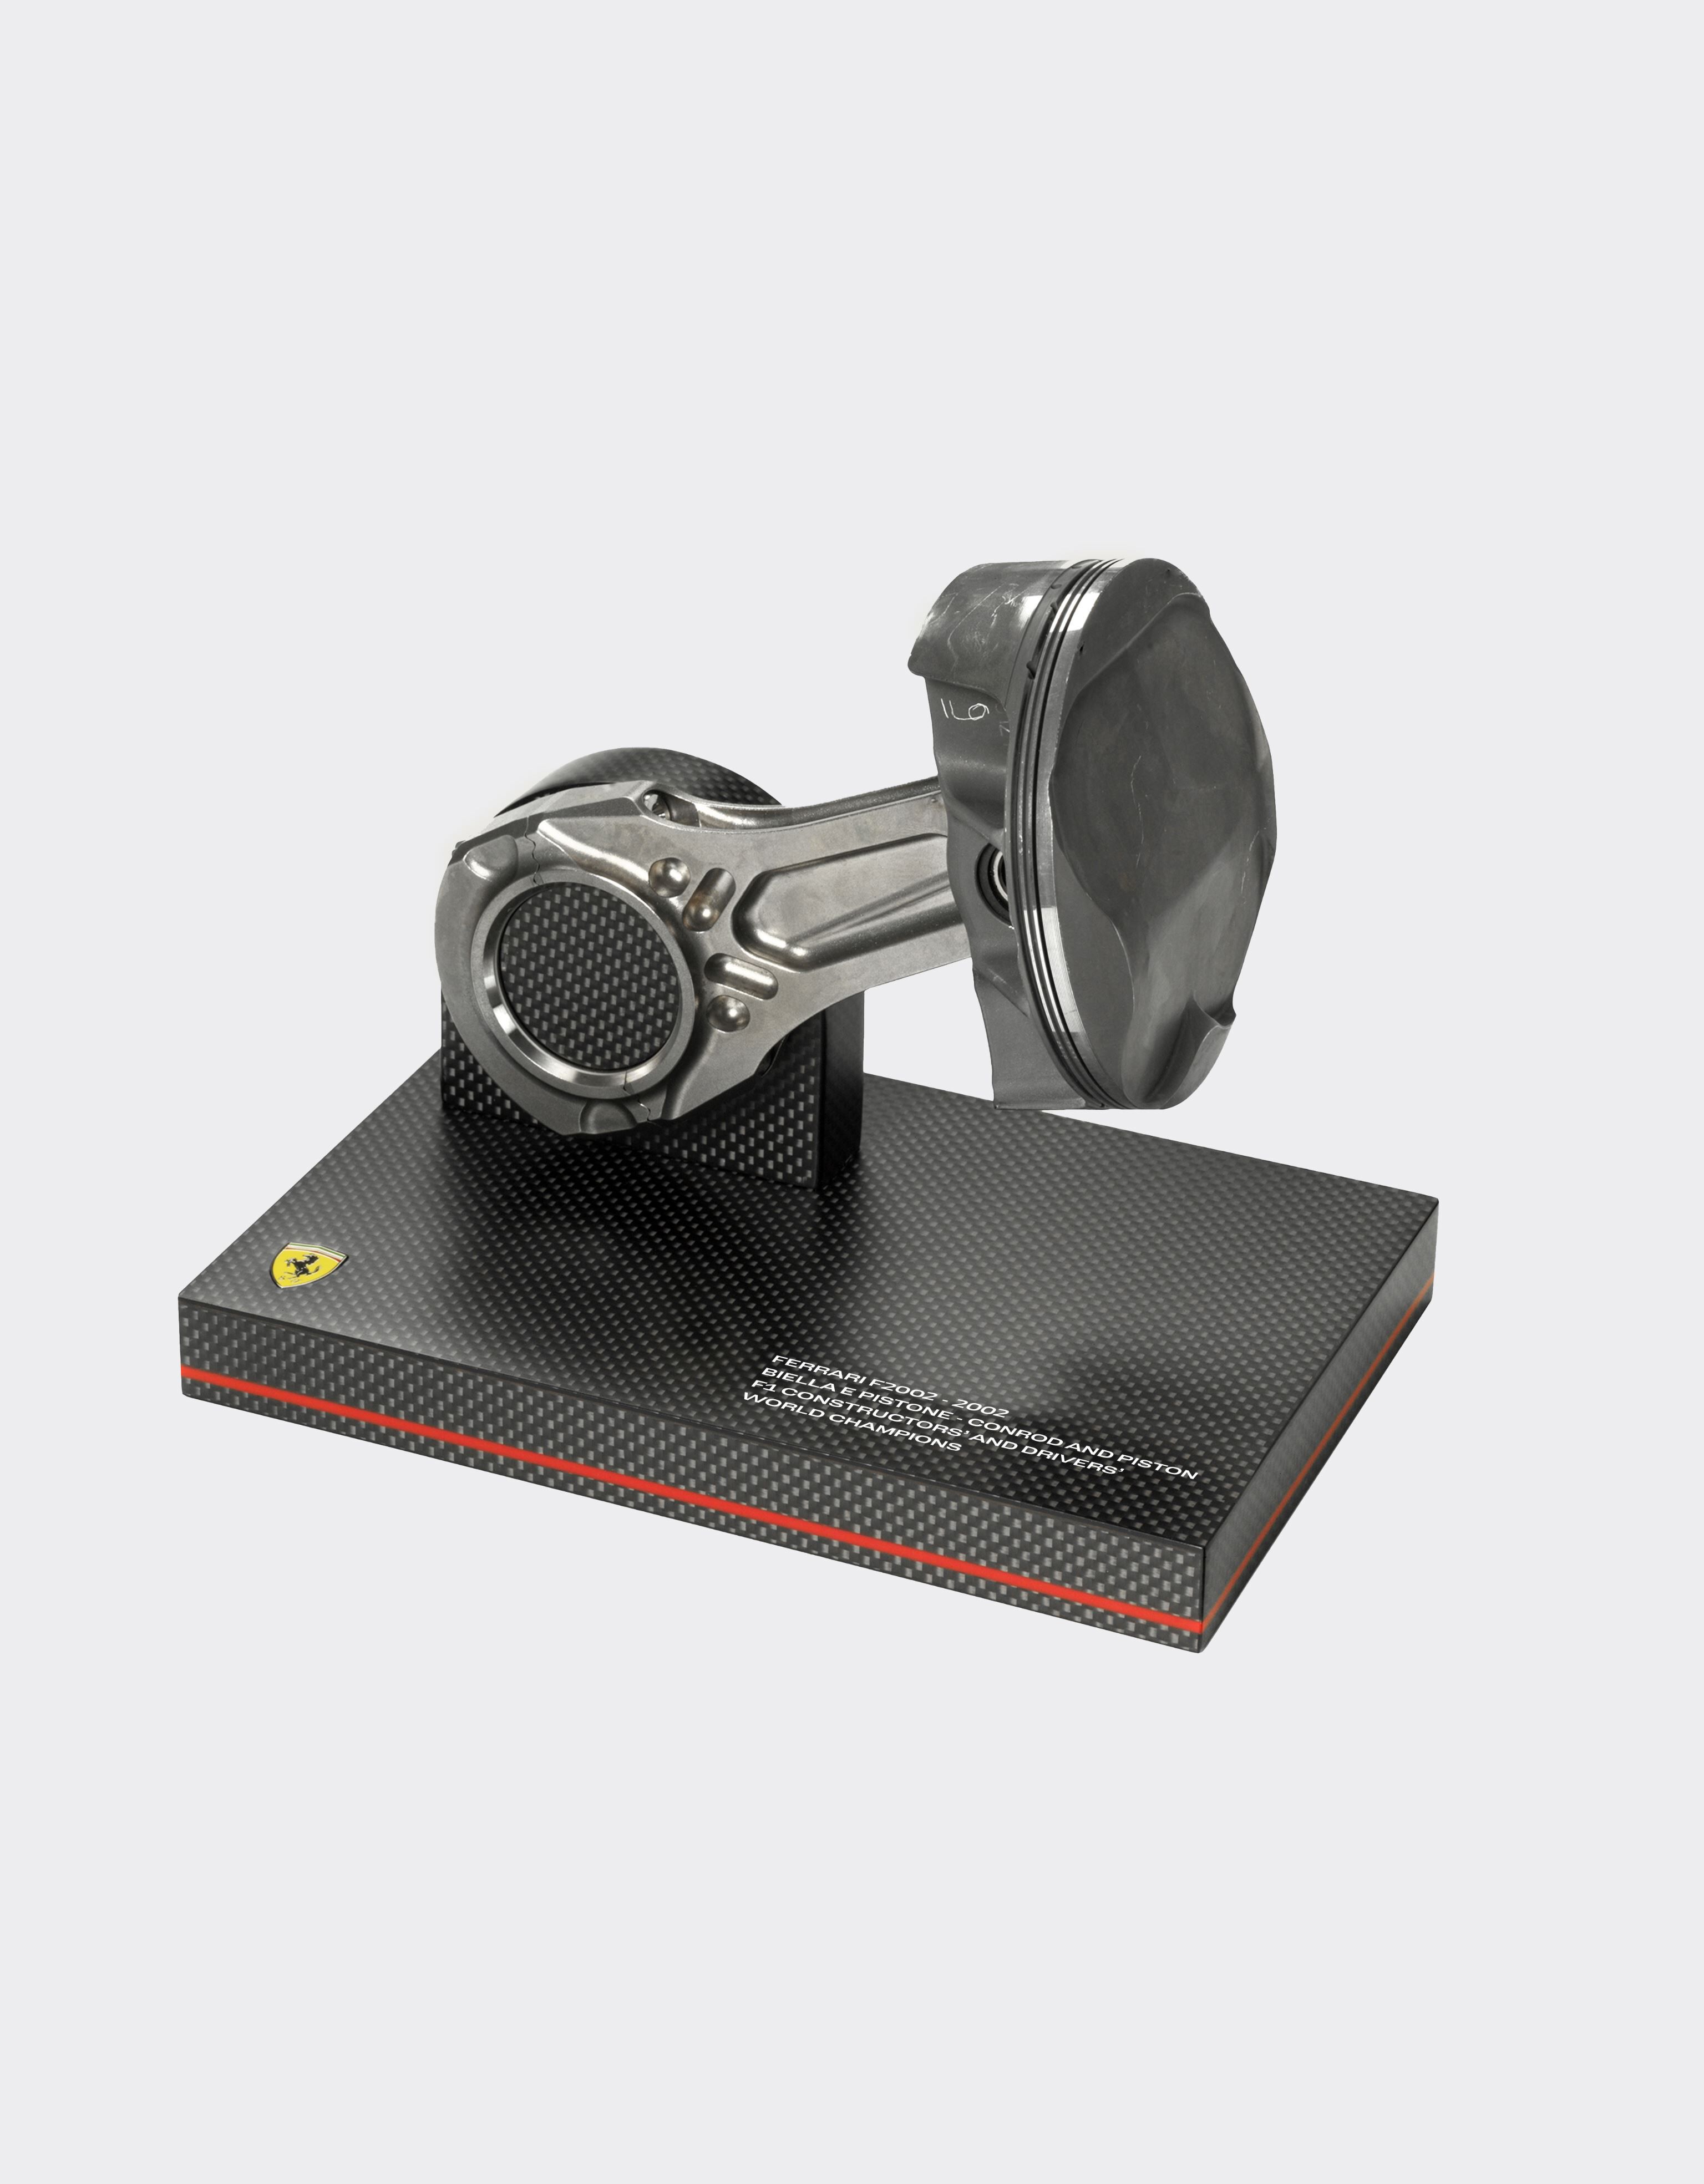 Ferrari Original connecting rod and piston set from the F2002, winner of the 2002 Constructors’ and Drivers’ Championships MULTICOLOUR F1069f